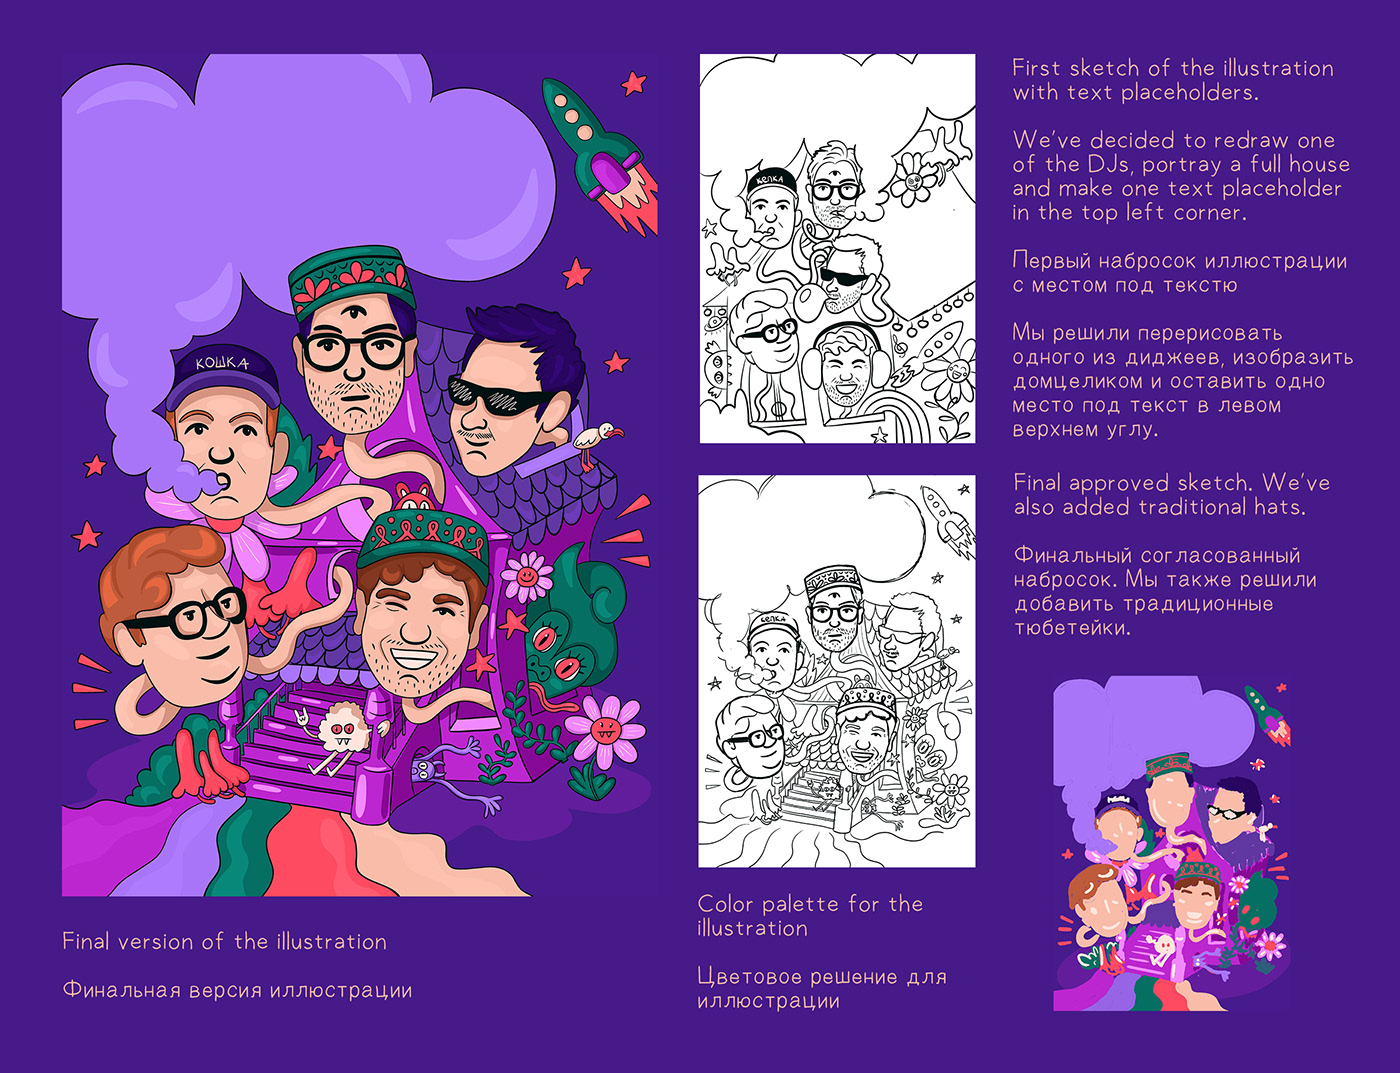 Illustration for a party poster with DJs and two sketches for it